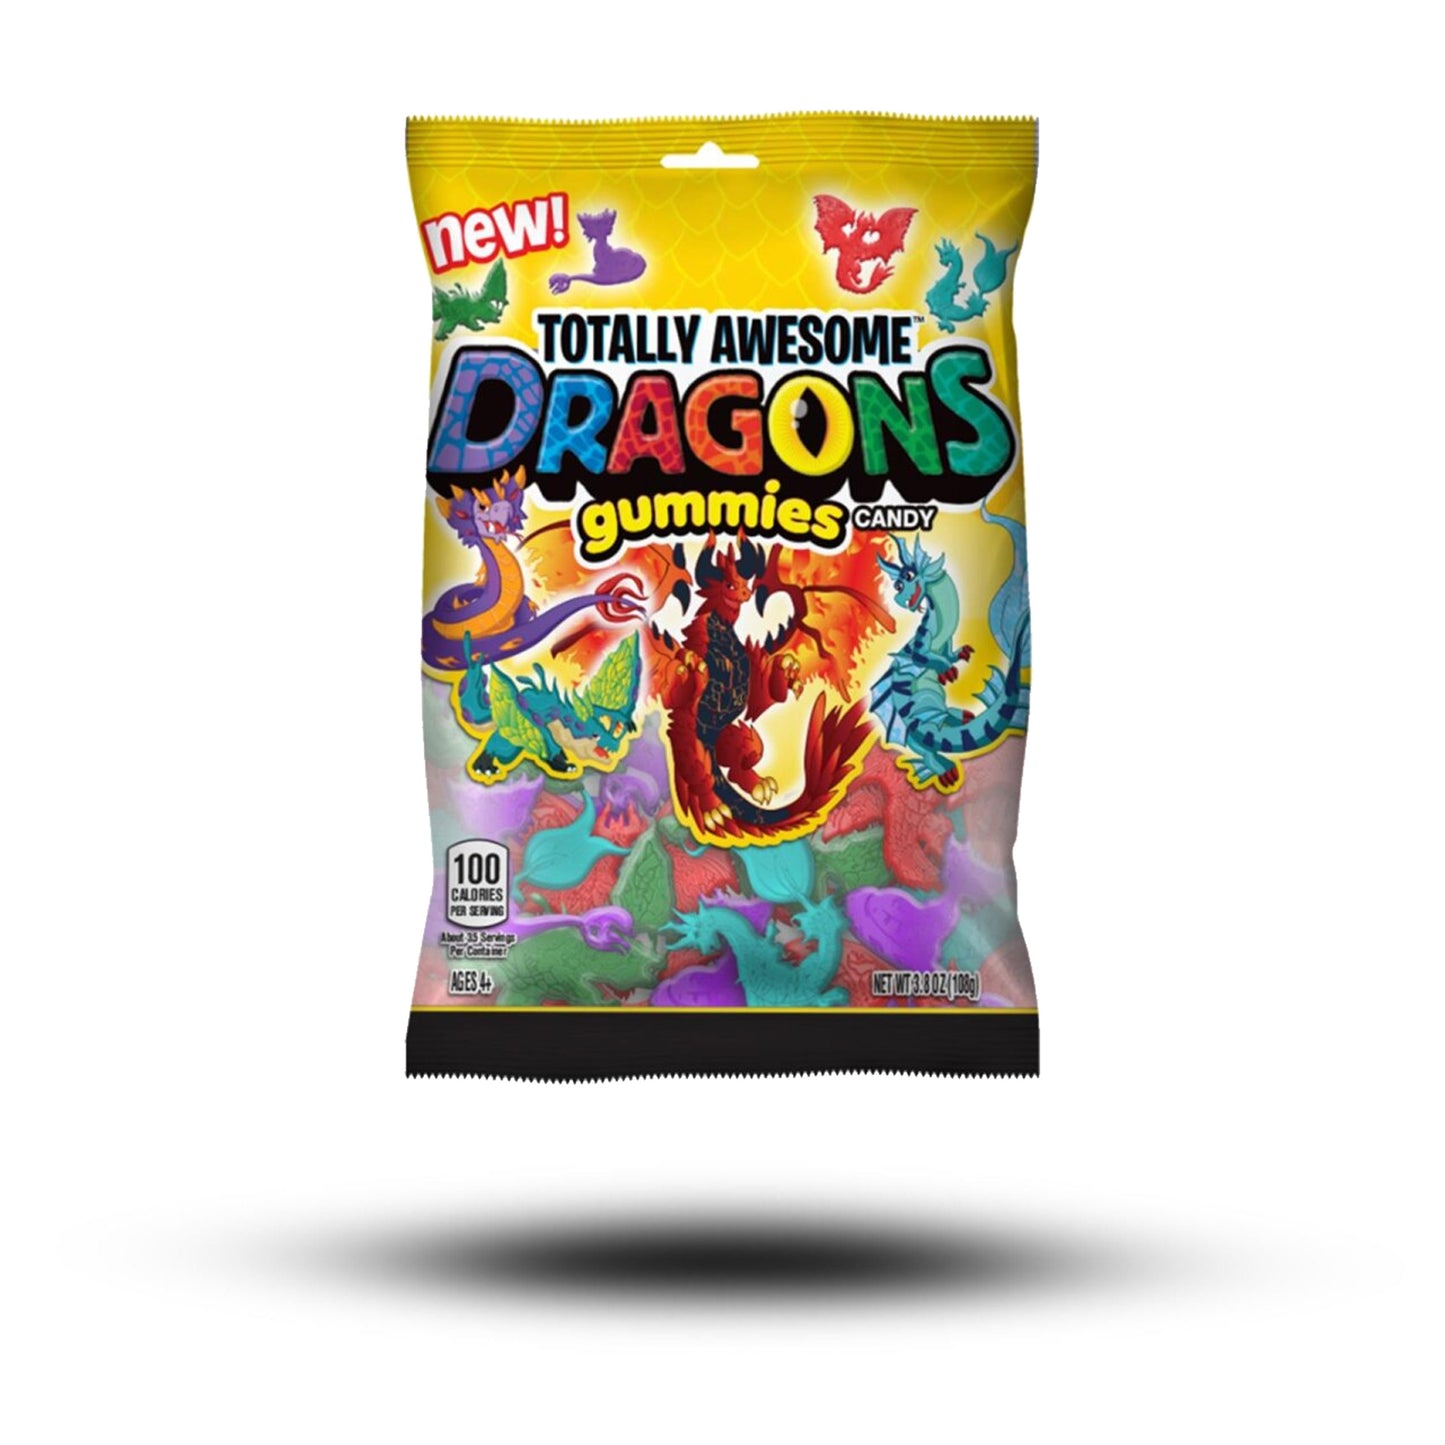 Topps Totally Awesome Dragons Gummies 108g MHD:03.03.23